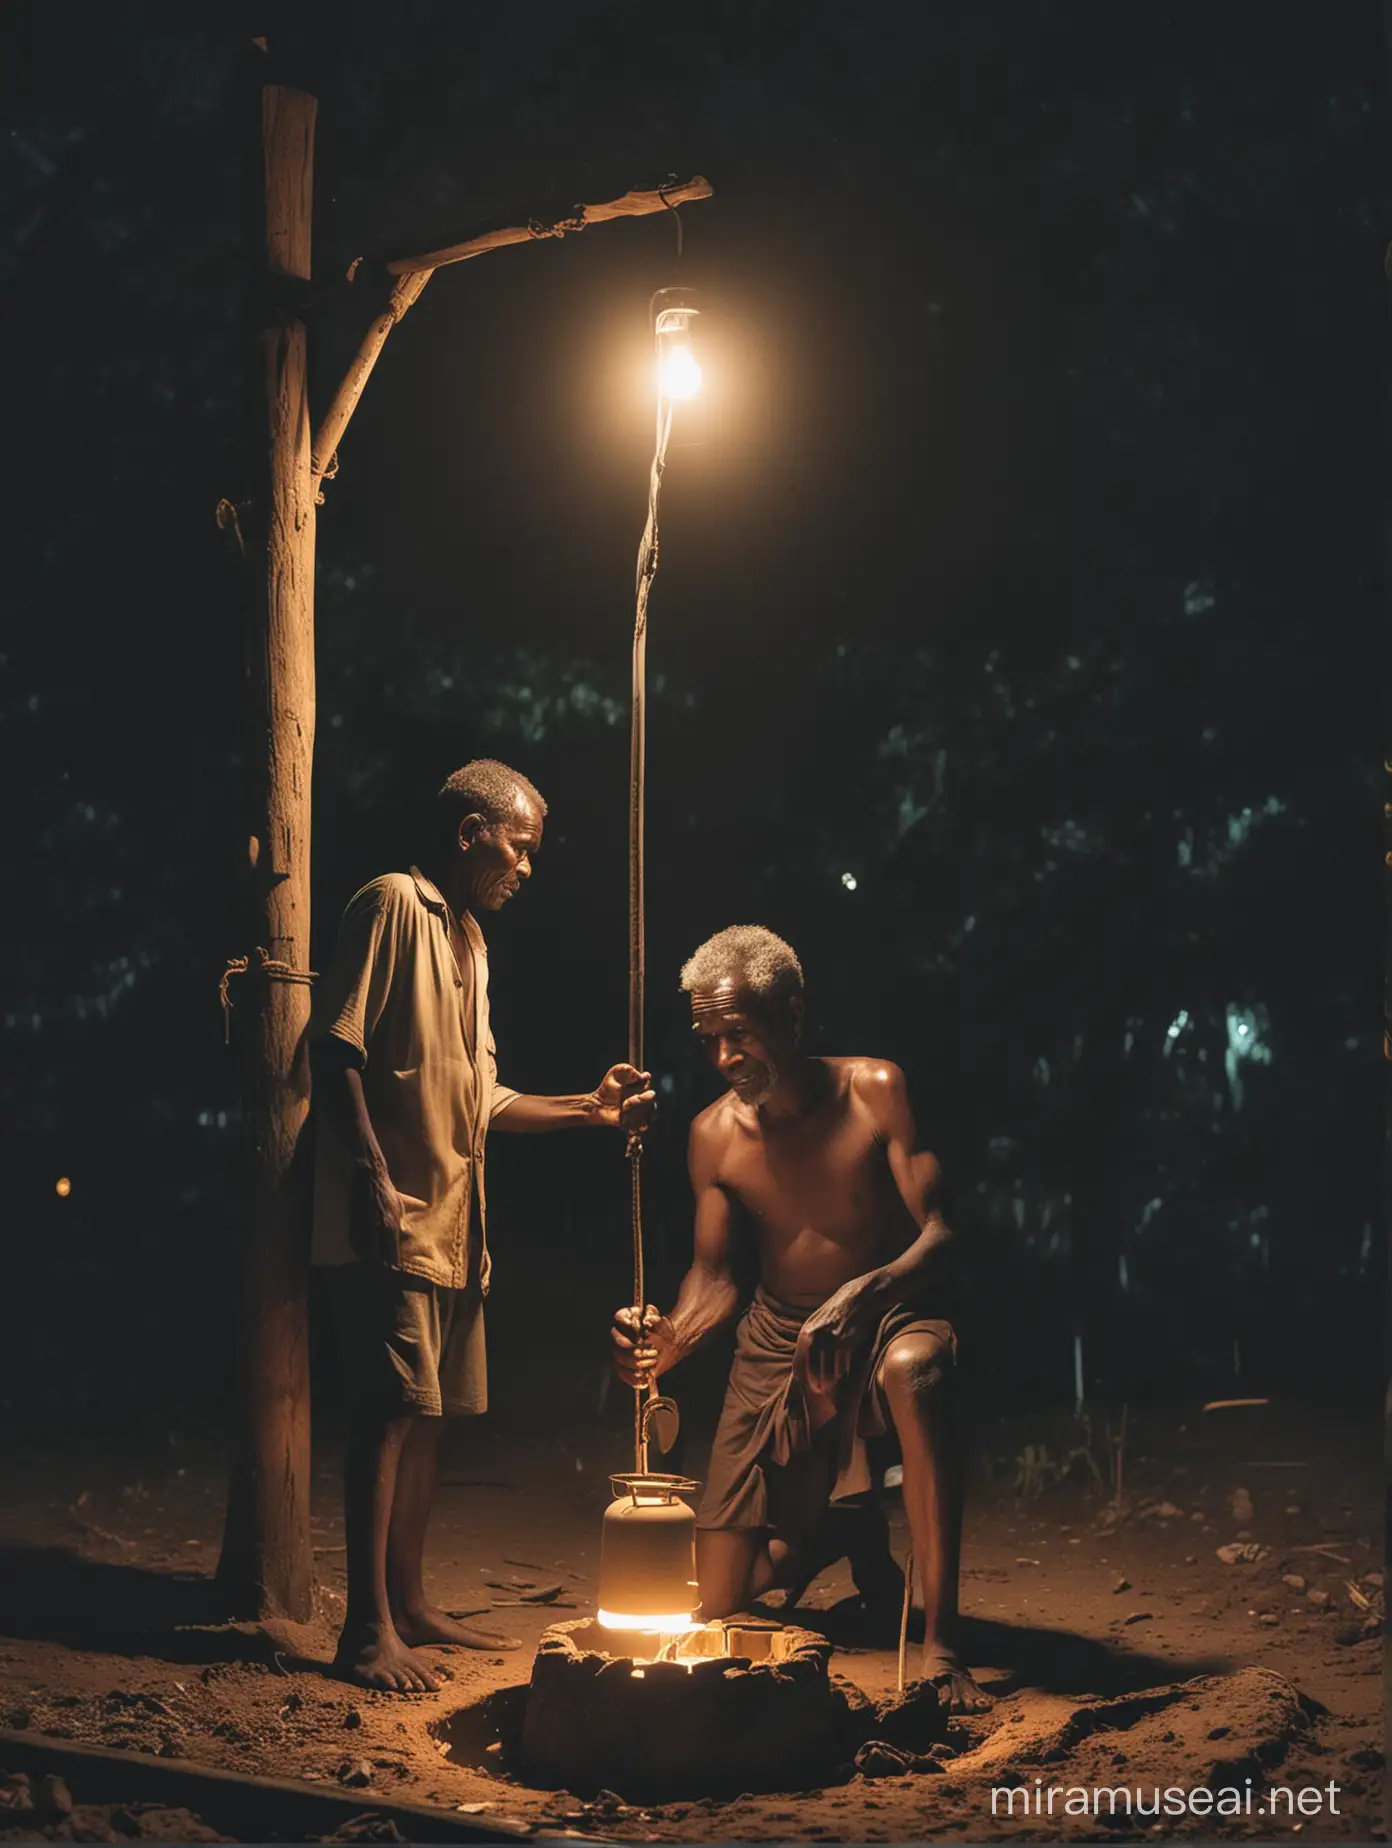 Papuan Grandfather and Grandson Repairing Village Well by Gas Lamp at Night